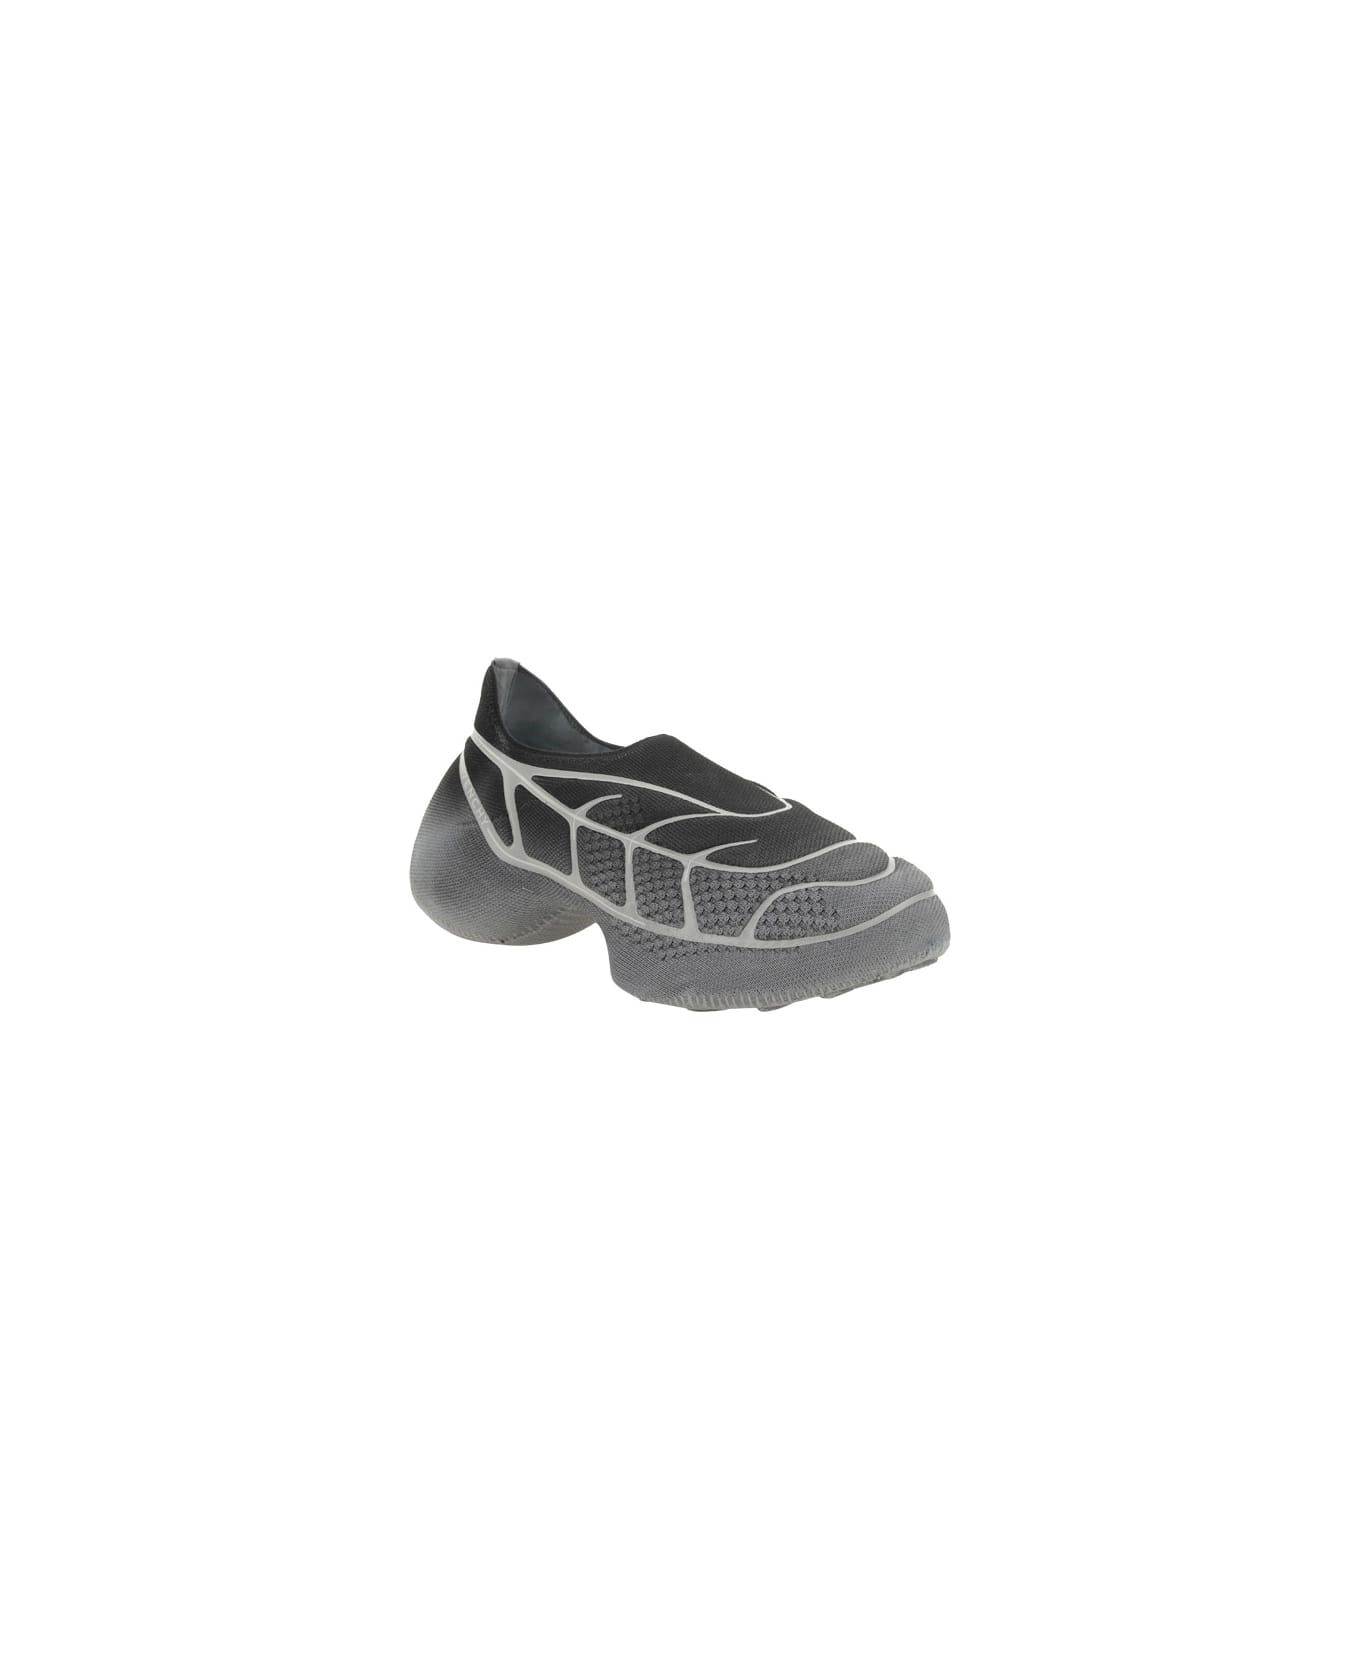 Givenchy Tk-360 Plus Sneakers - Black/grey